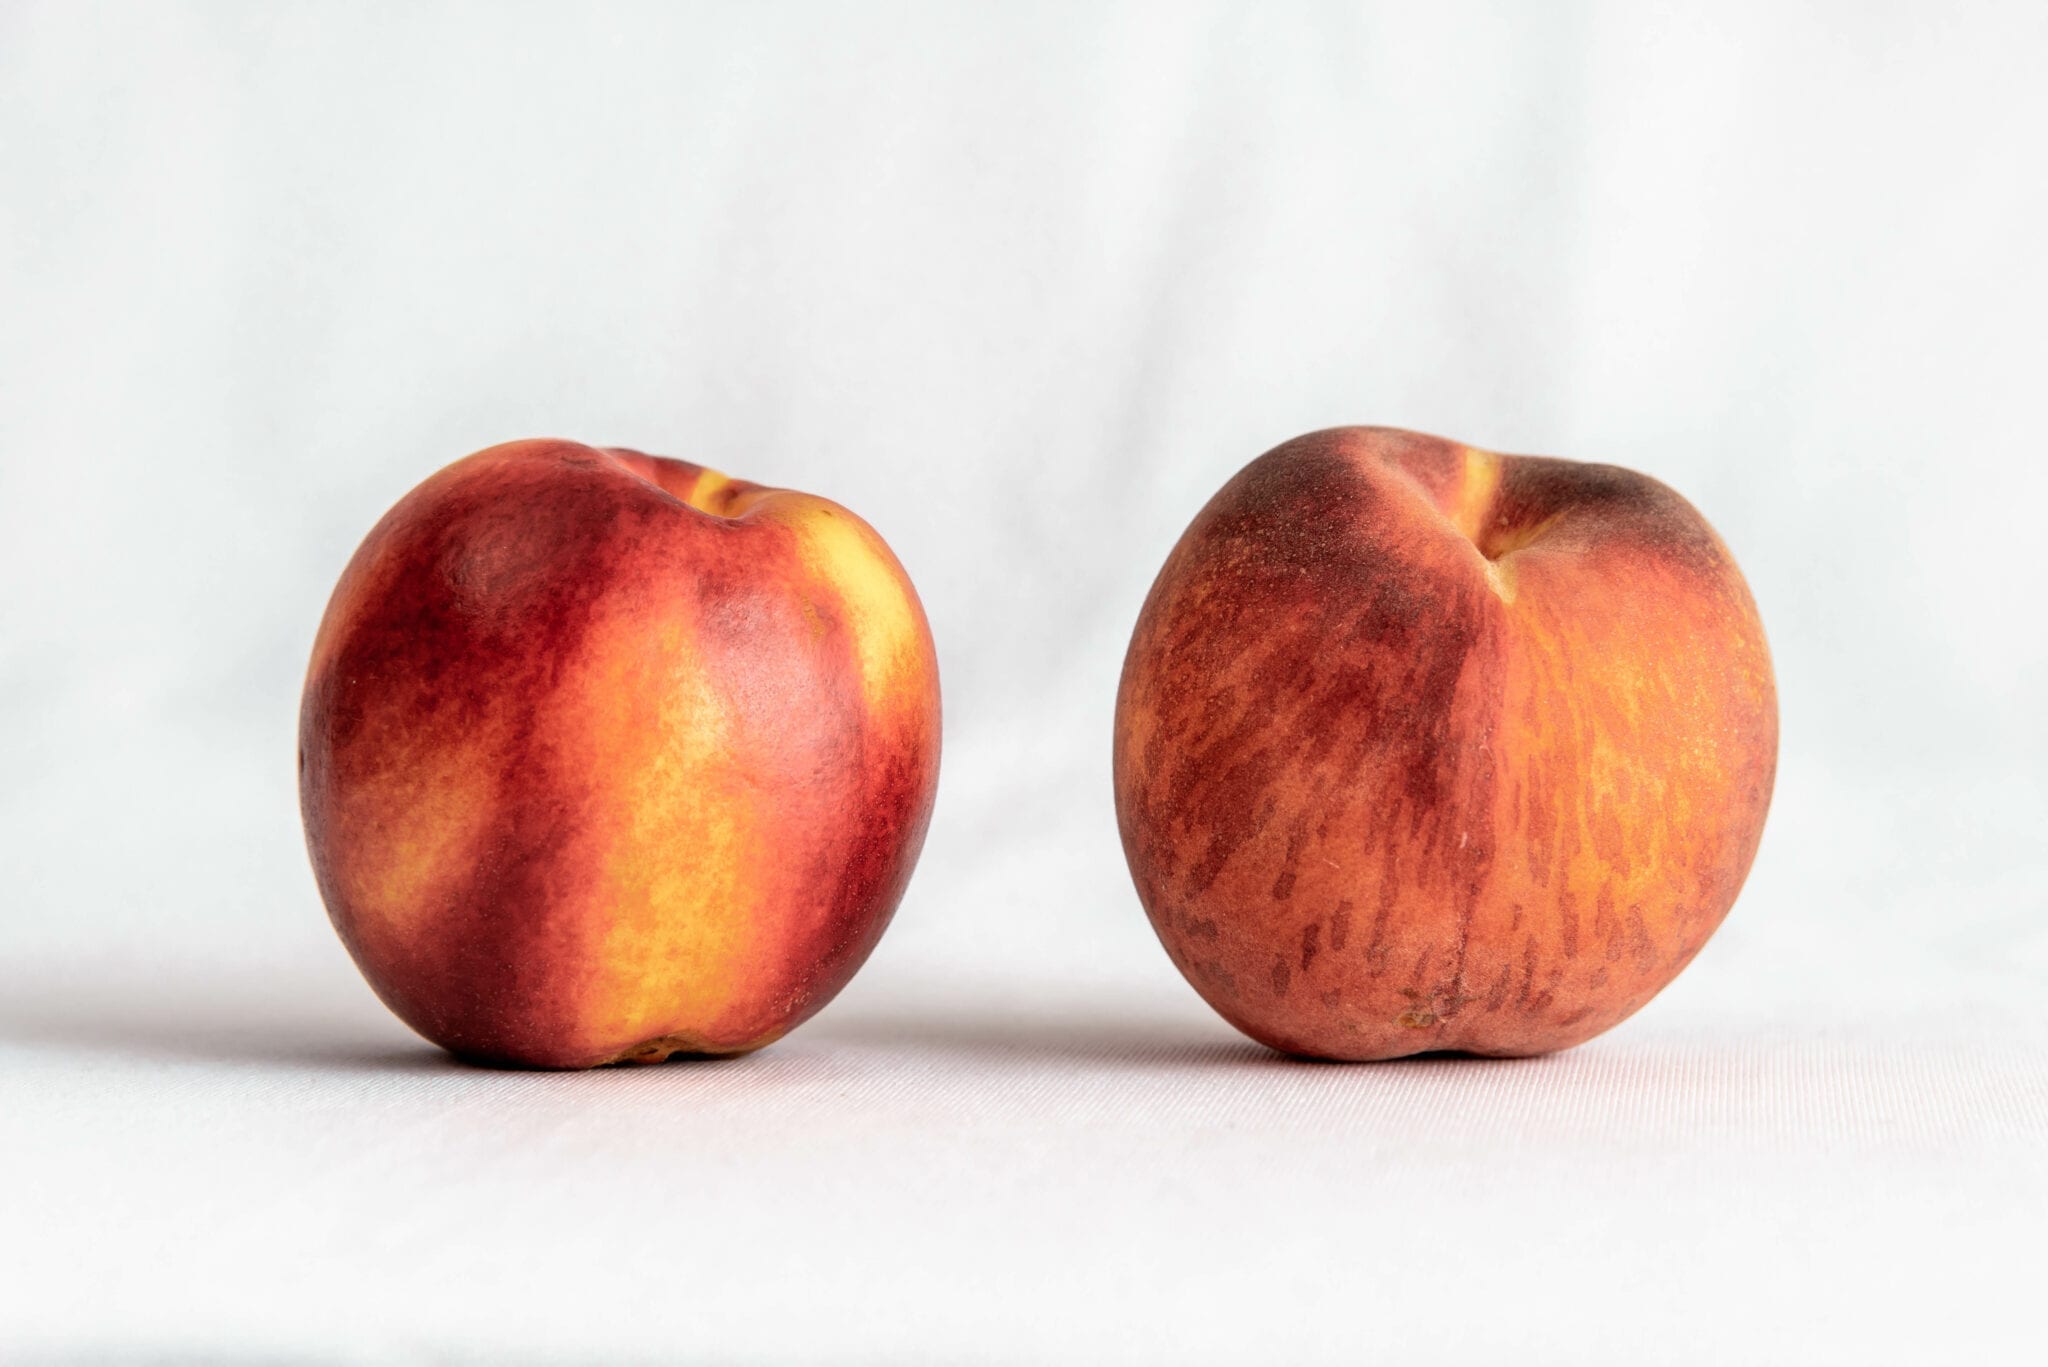 Unbranded peach and nectarine print.